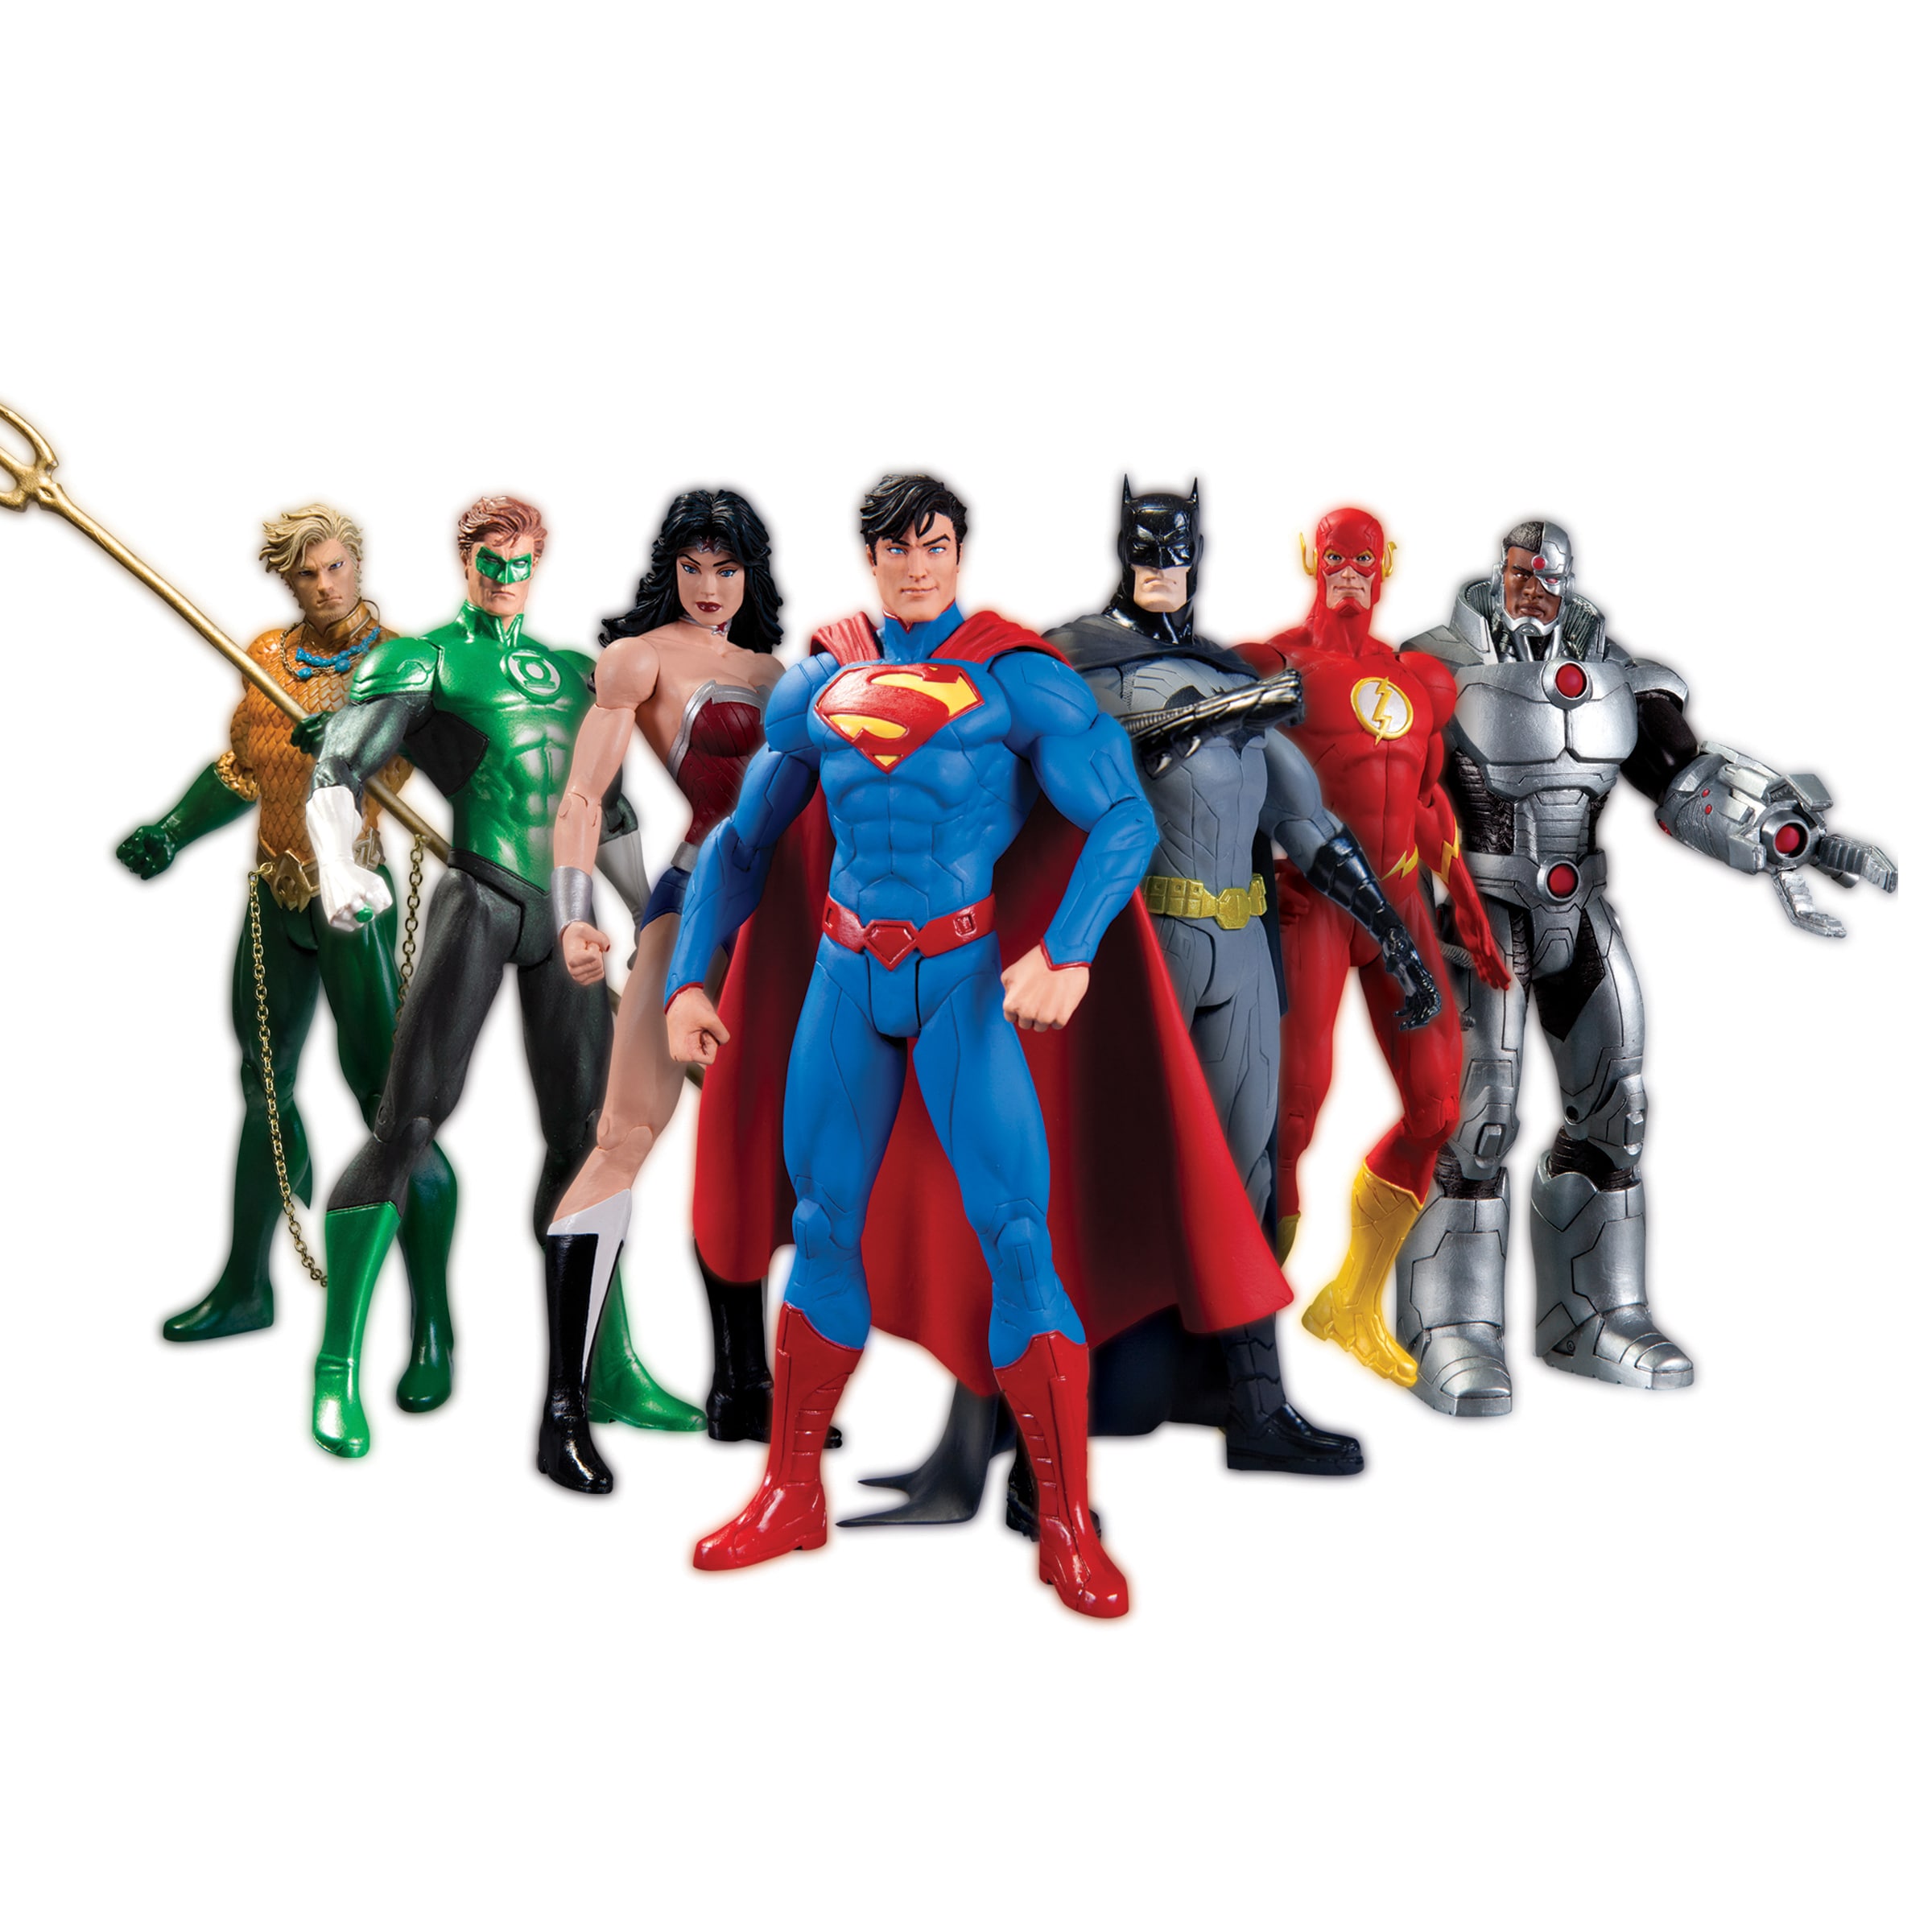 We Can Be Heroes Justice League (7 Pack Box Set) Today $98.99